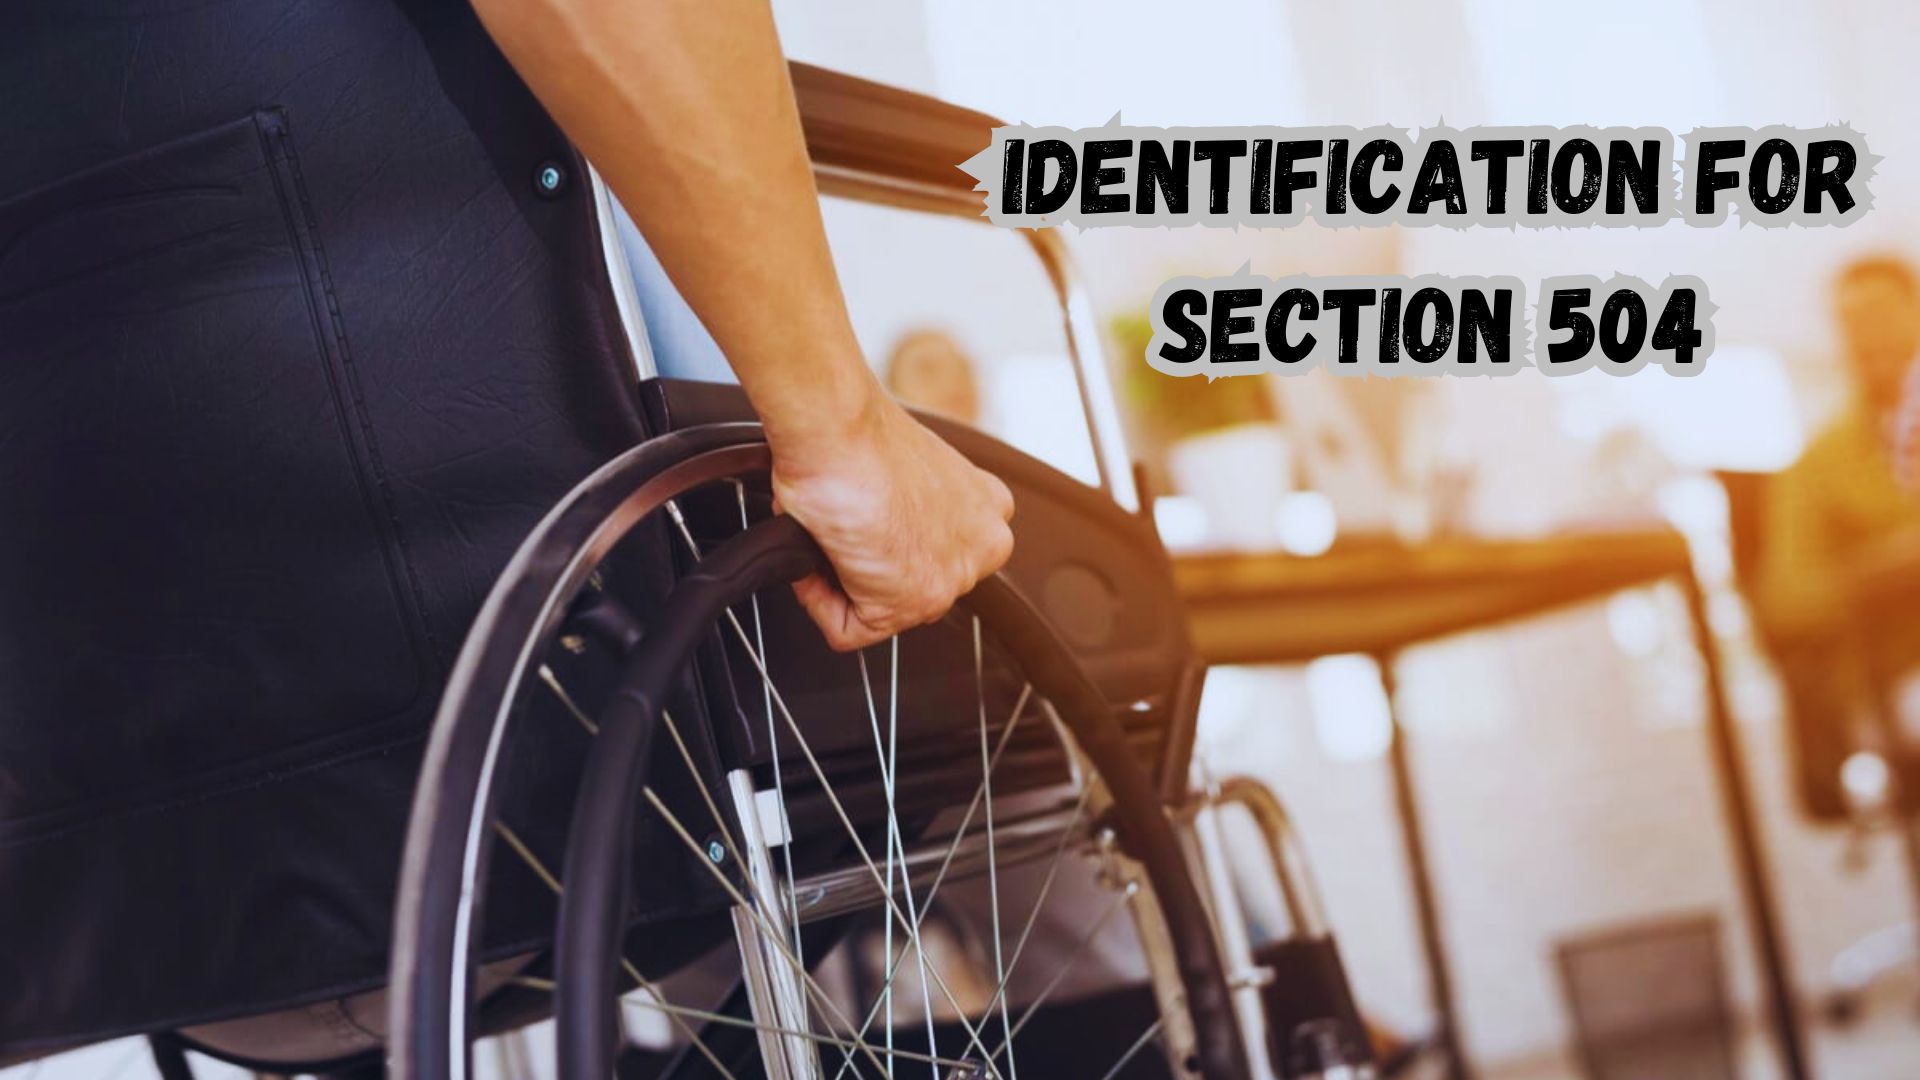 Identification for Section 504.